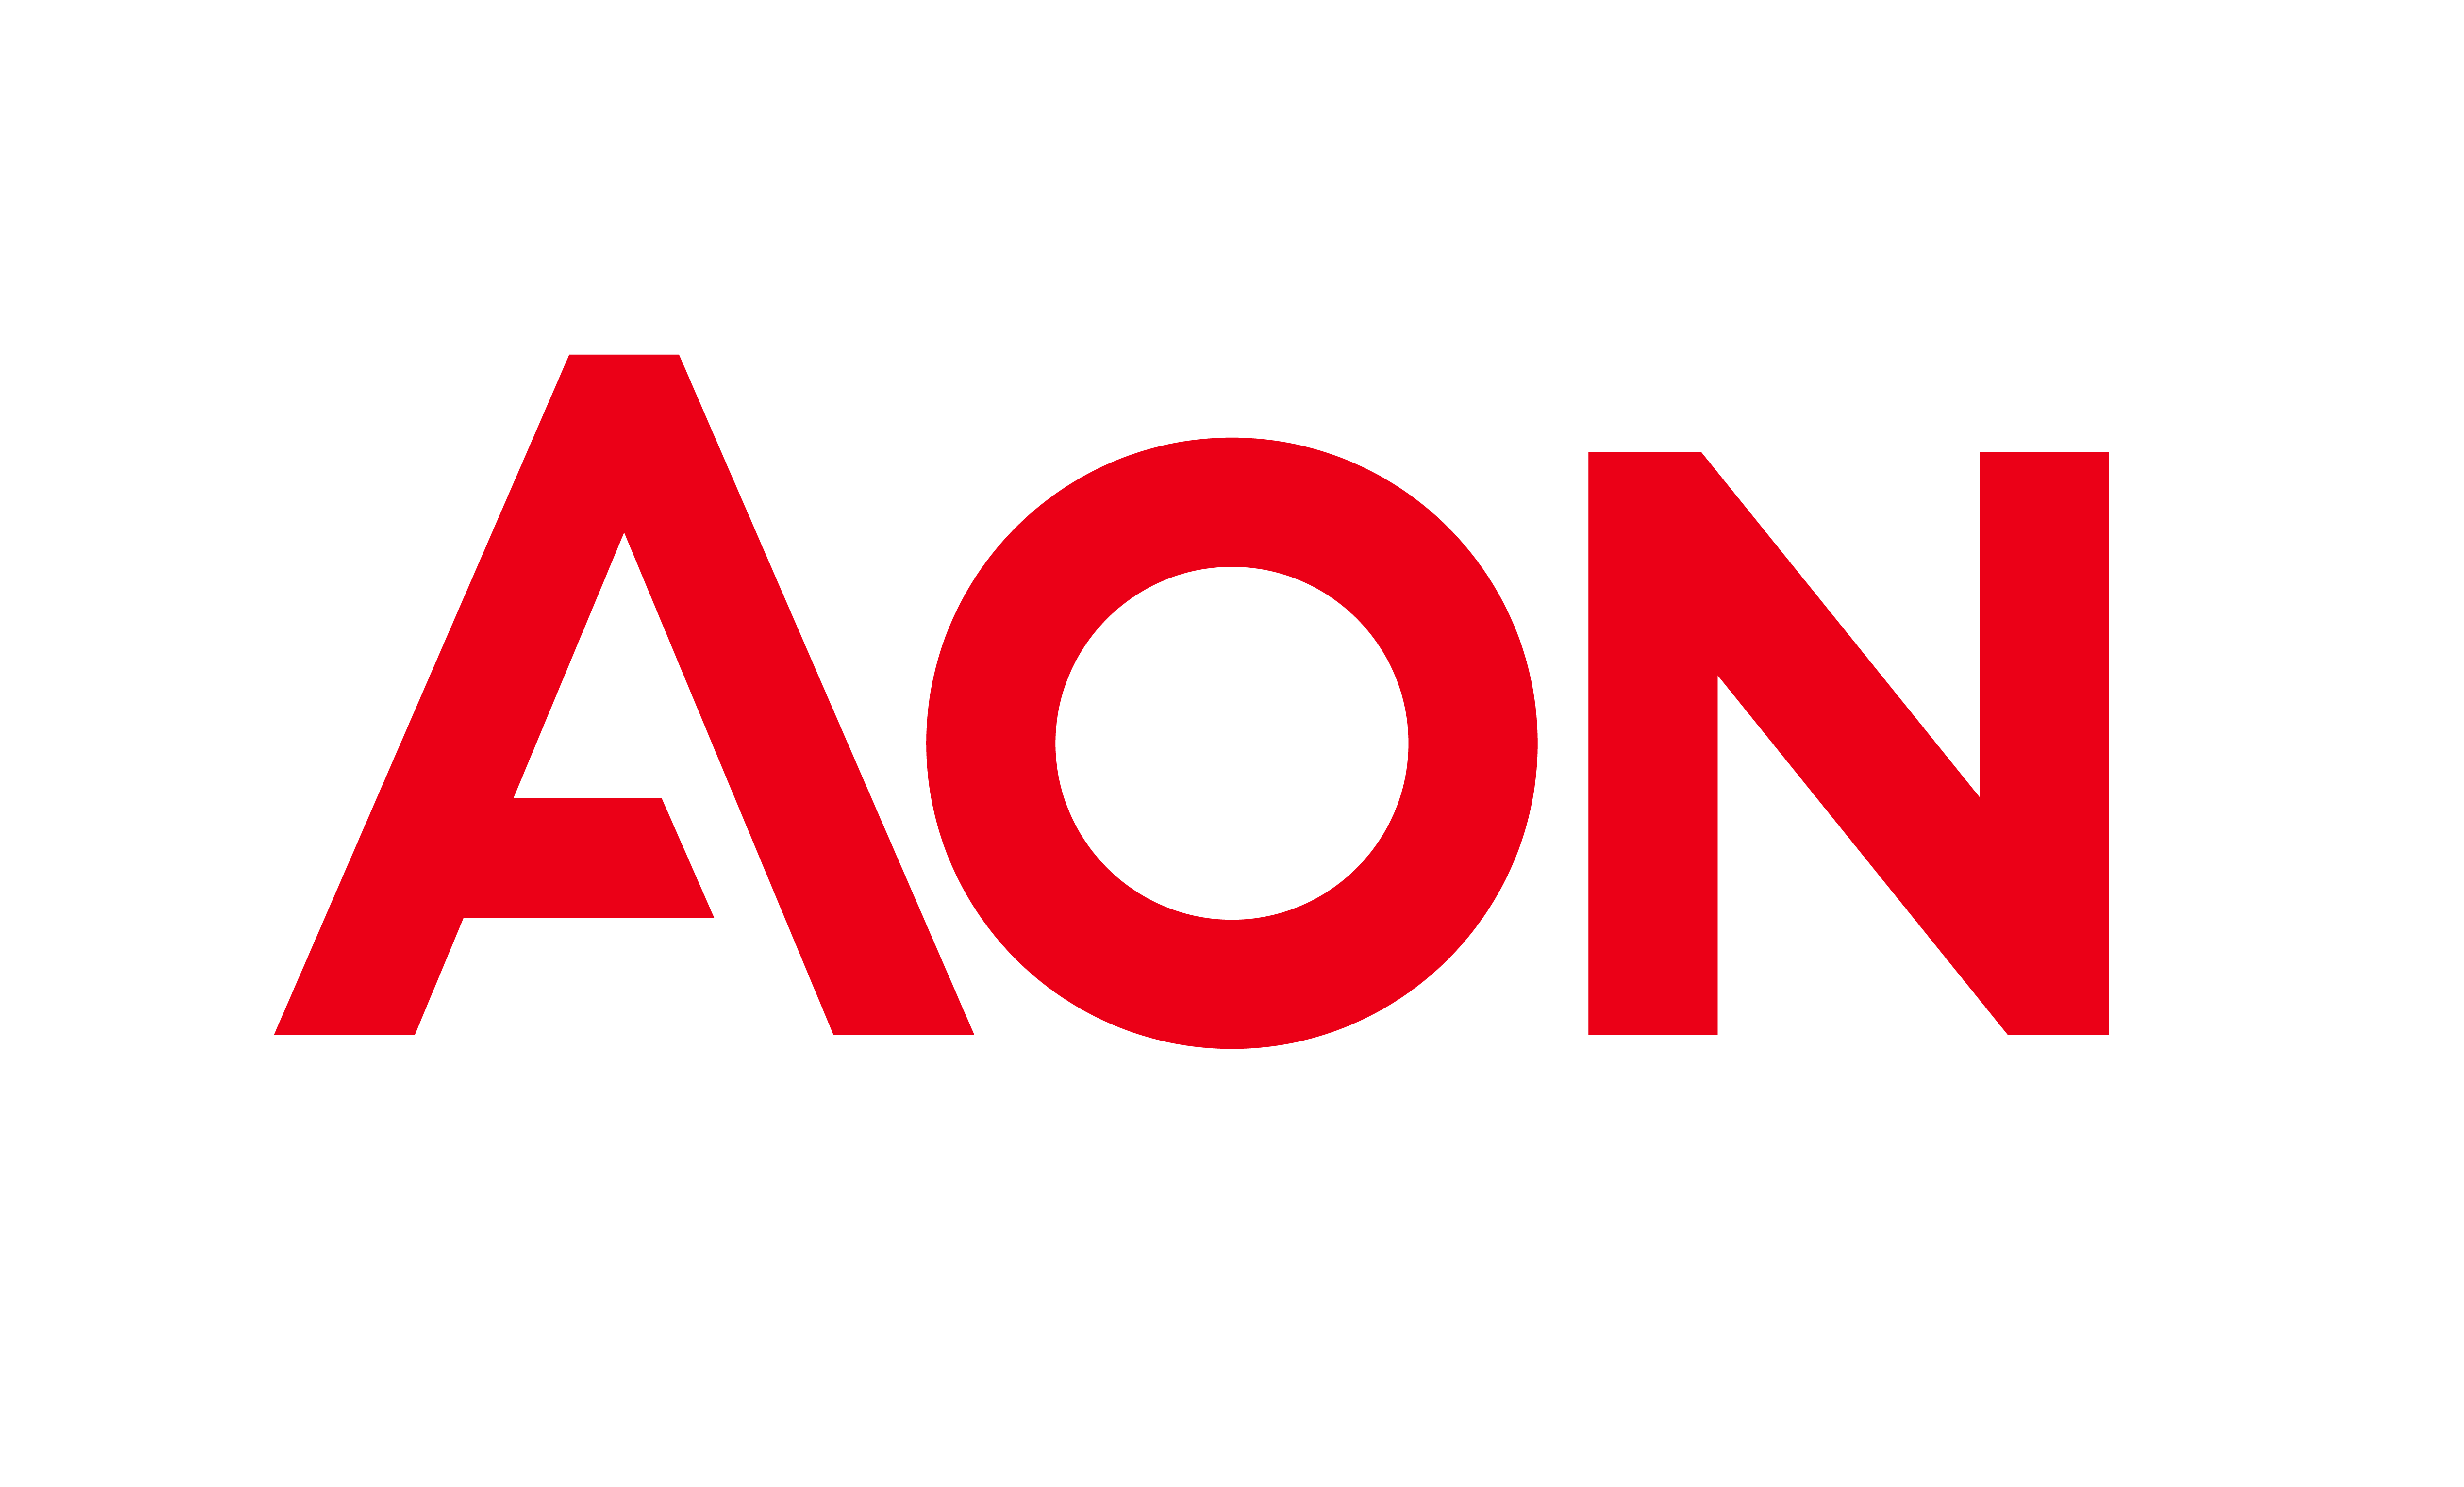 aon_logo_signature_red_rgb-(1).png